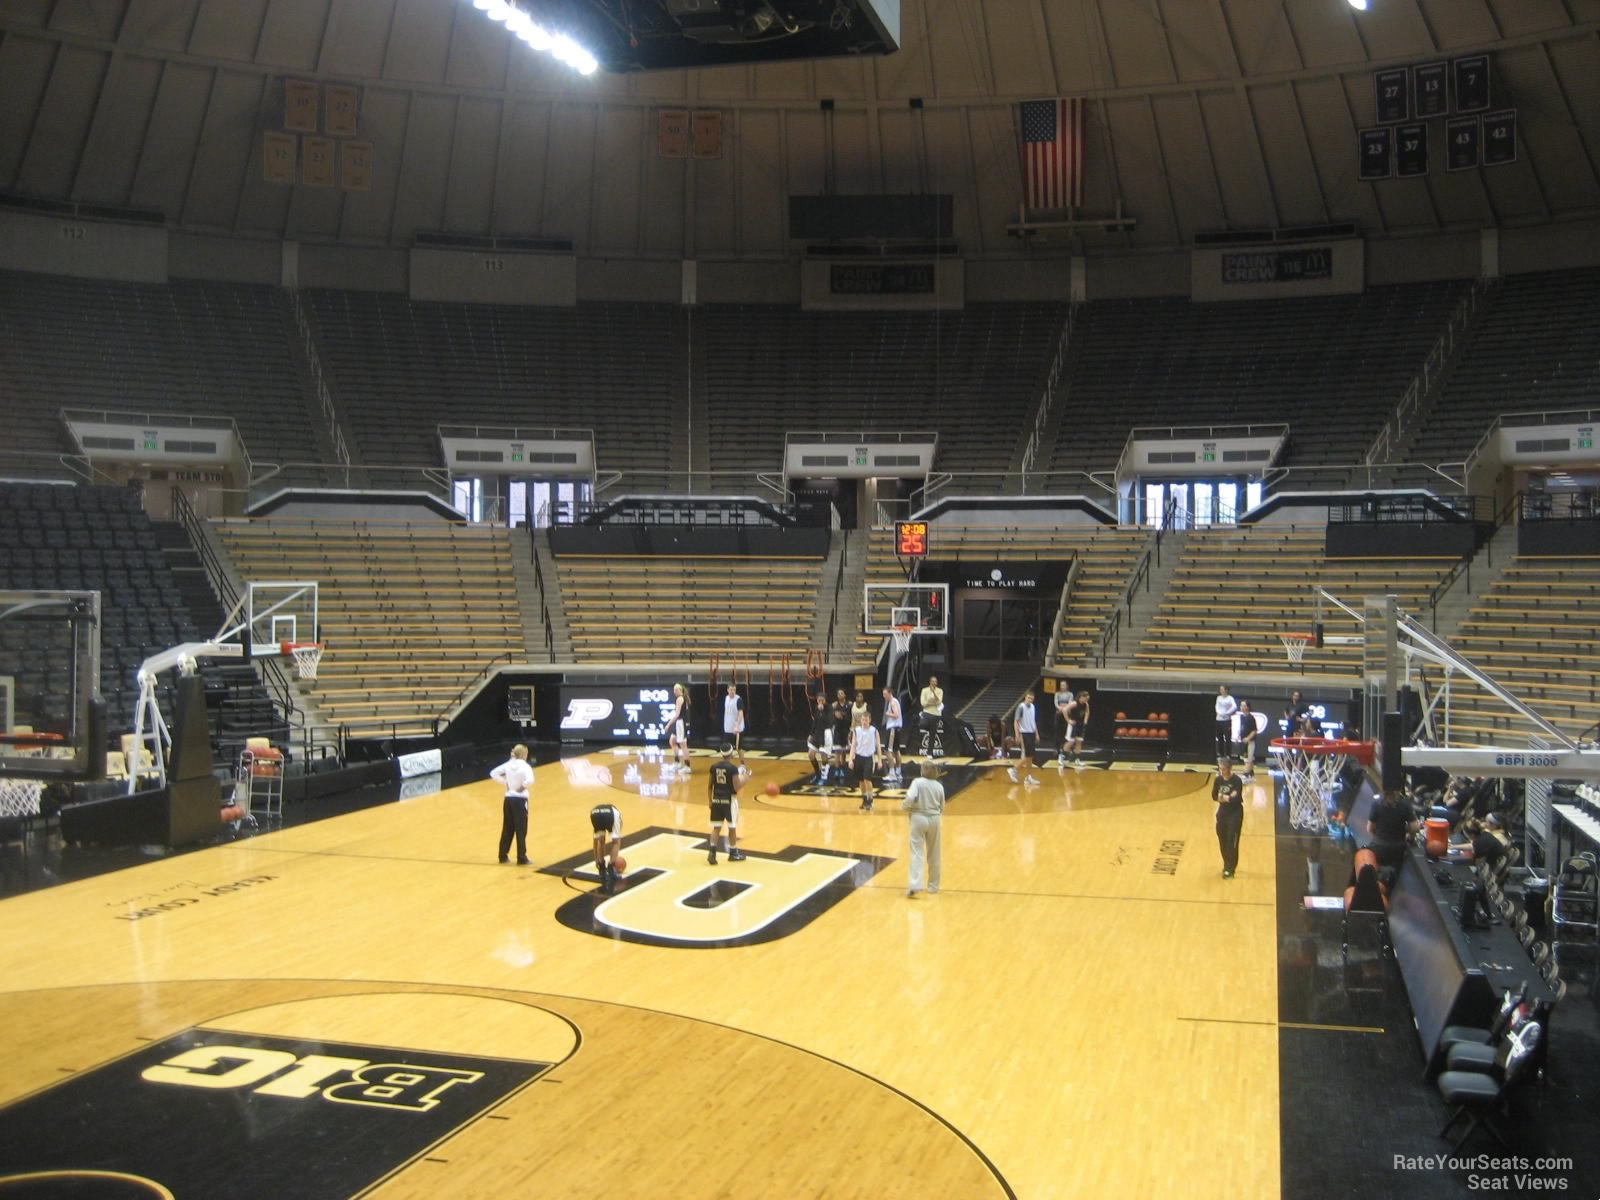 section 4, row 10 seat view  - mackey arena